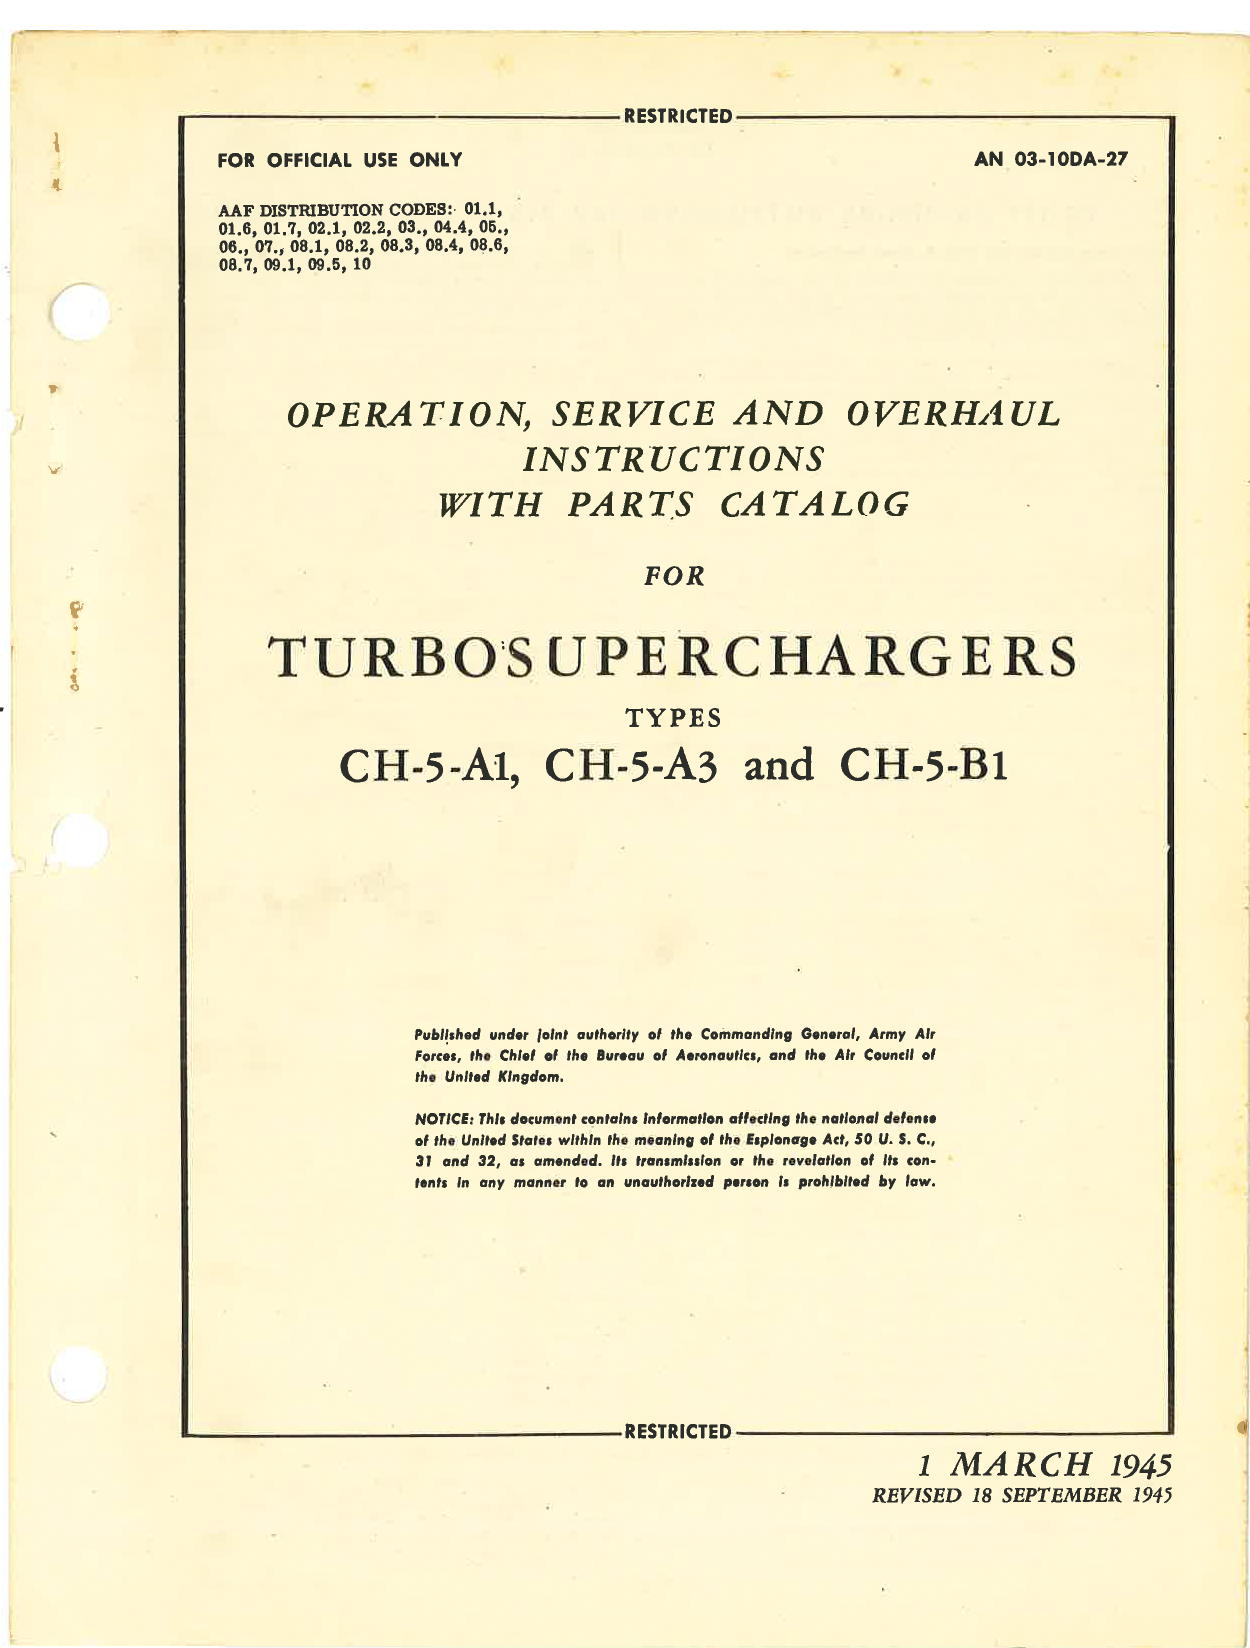 Sample page 1 from AirCorps Library document: Operation, Service, & Overhaul Instructions with Parts Catalog for Turbosuperchargers Types CH-5-A1, CH5-A3, and CH-5-B1